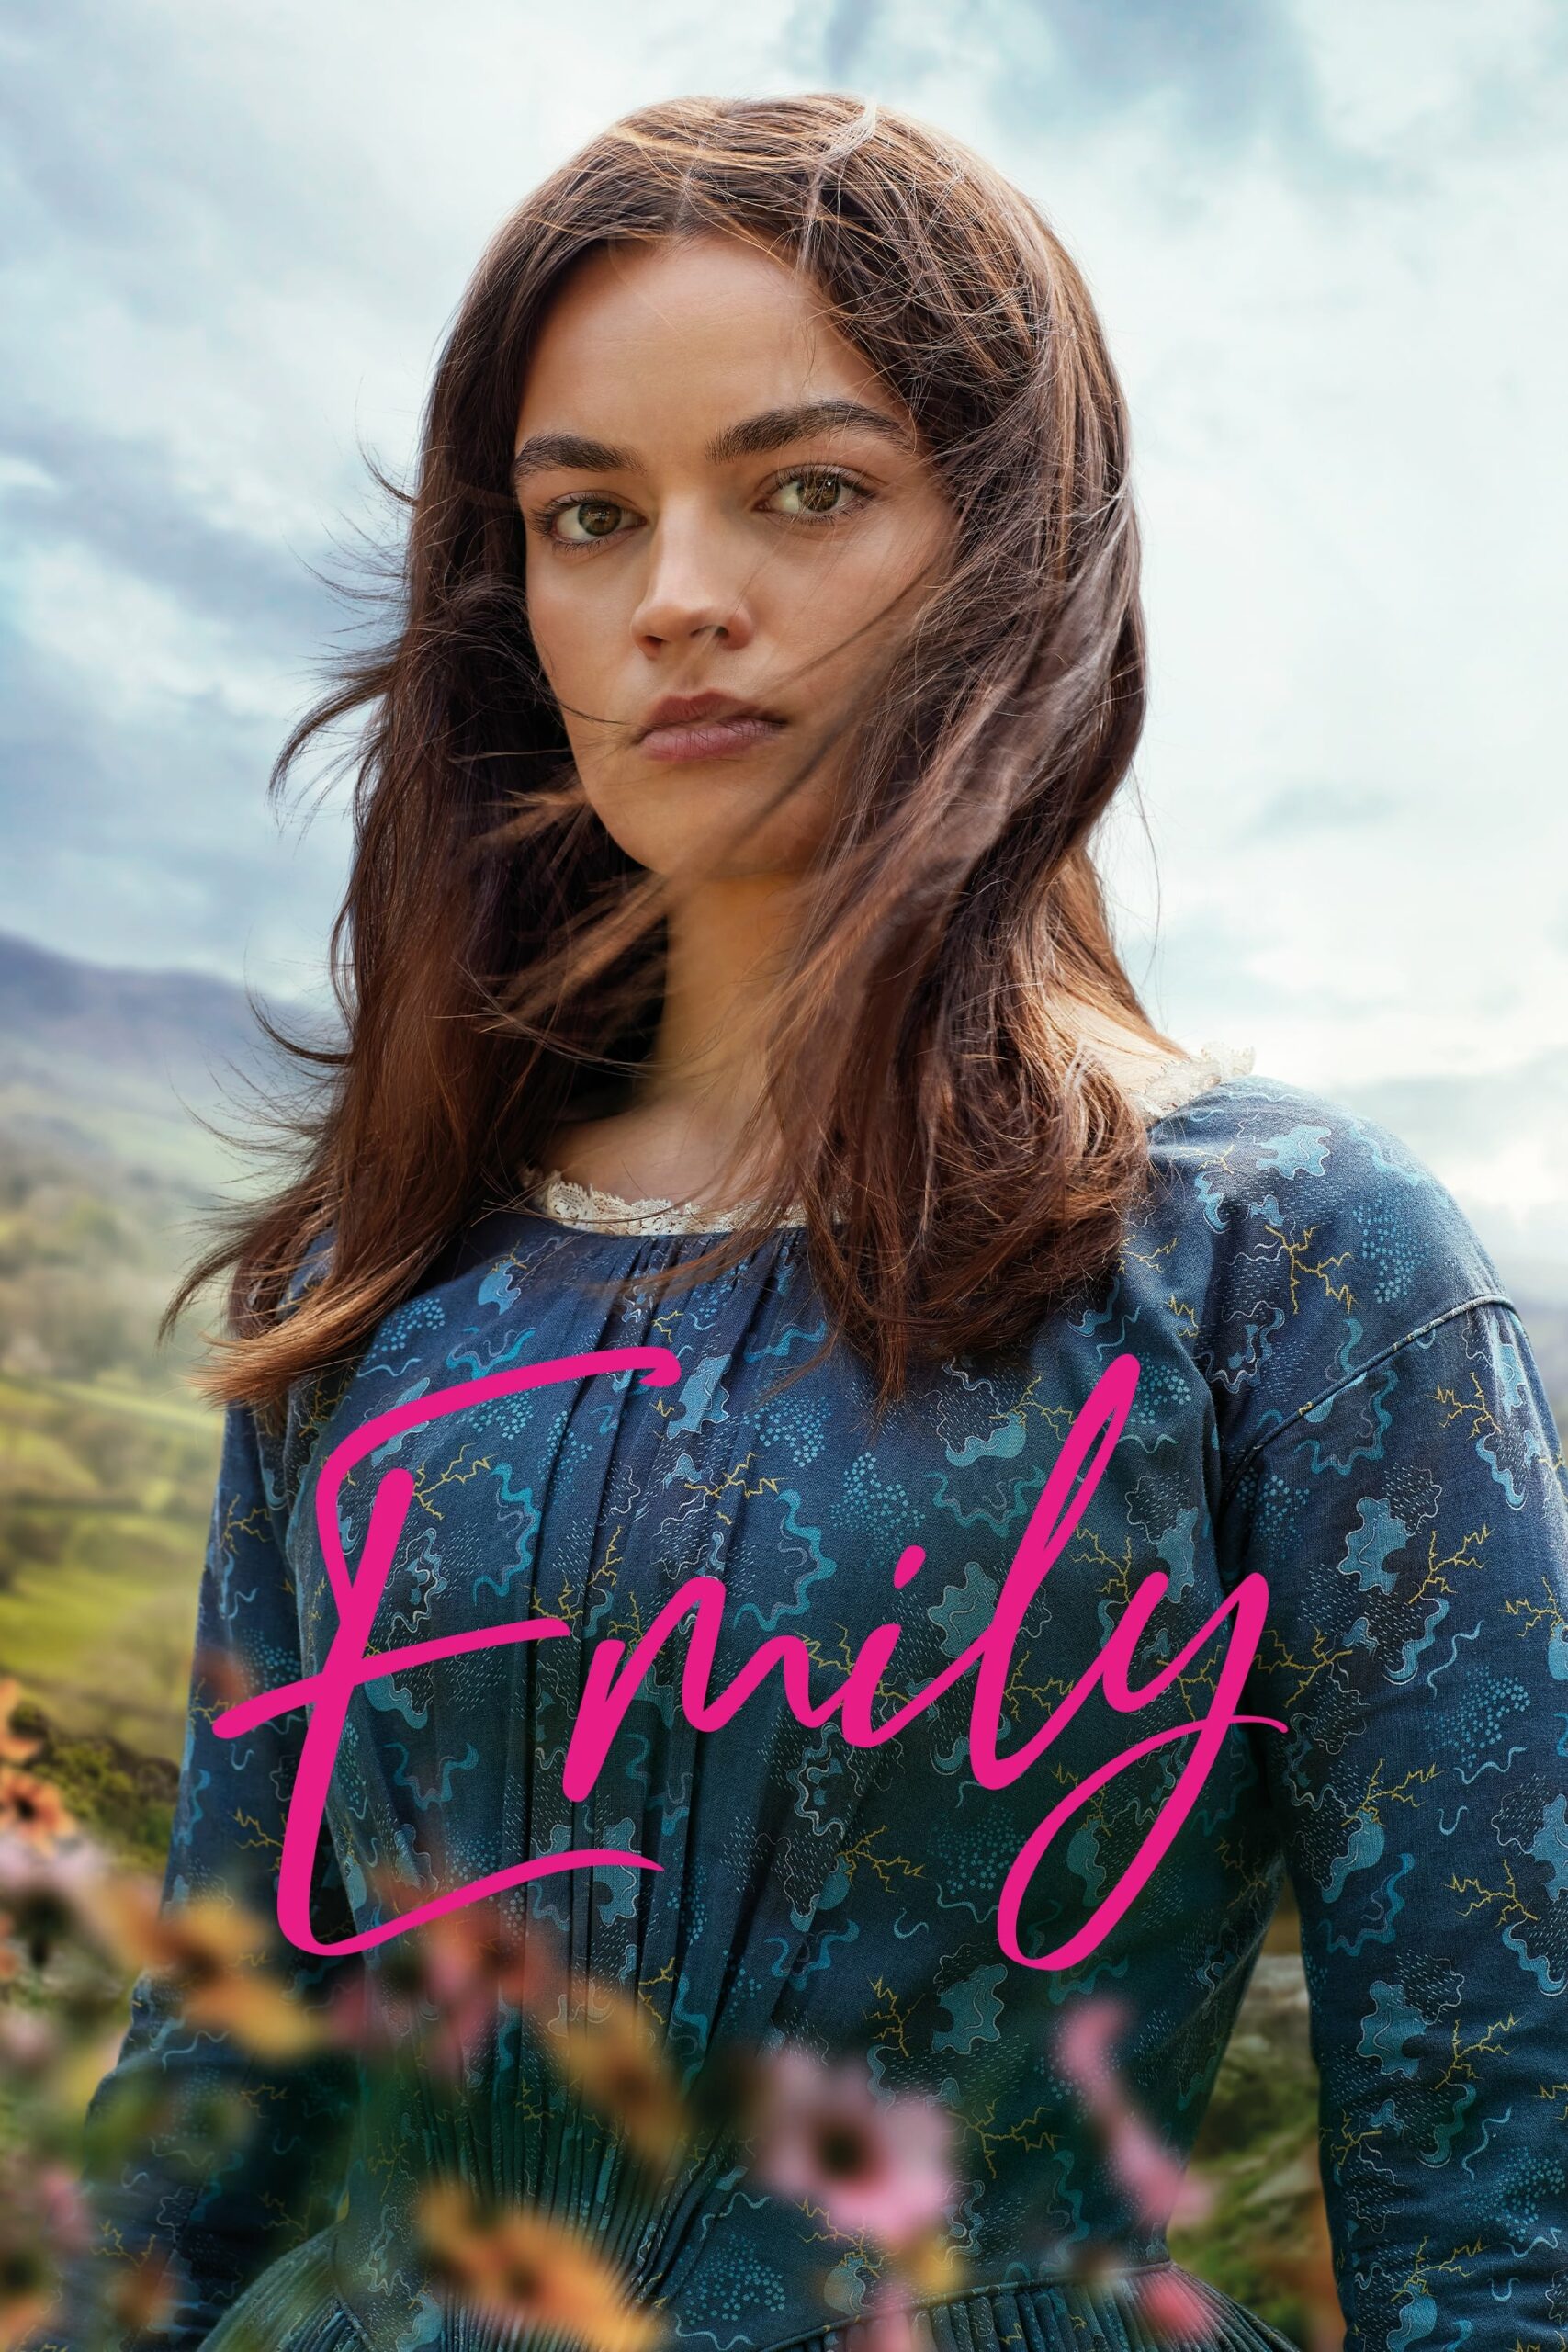 Poster for the movie "Emily"